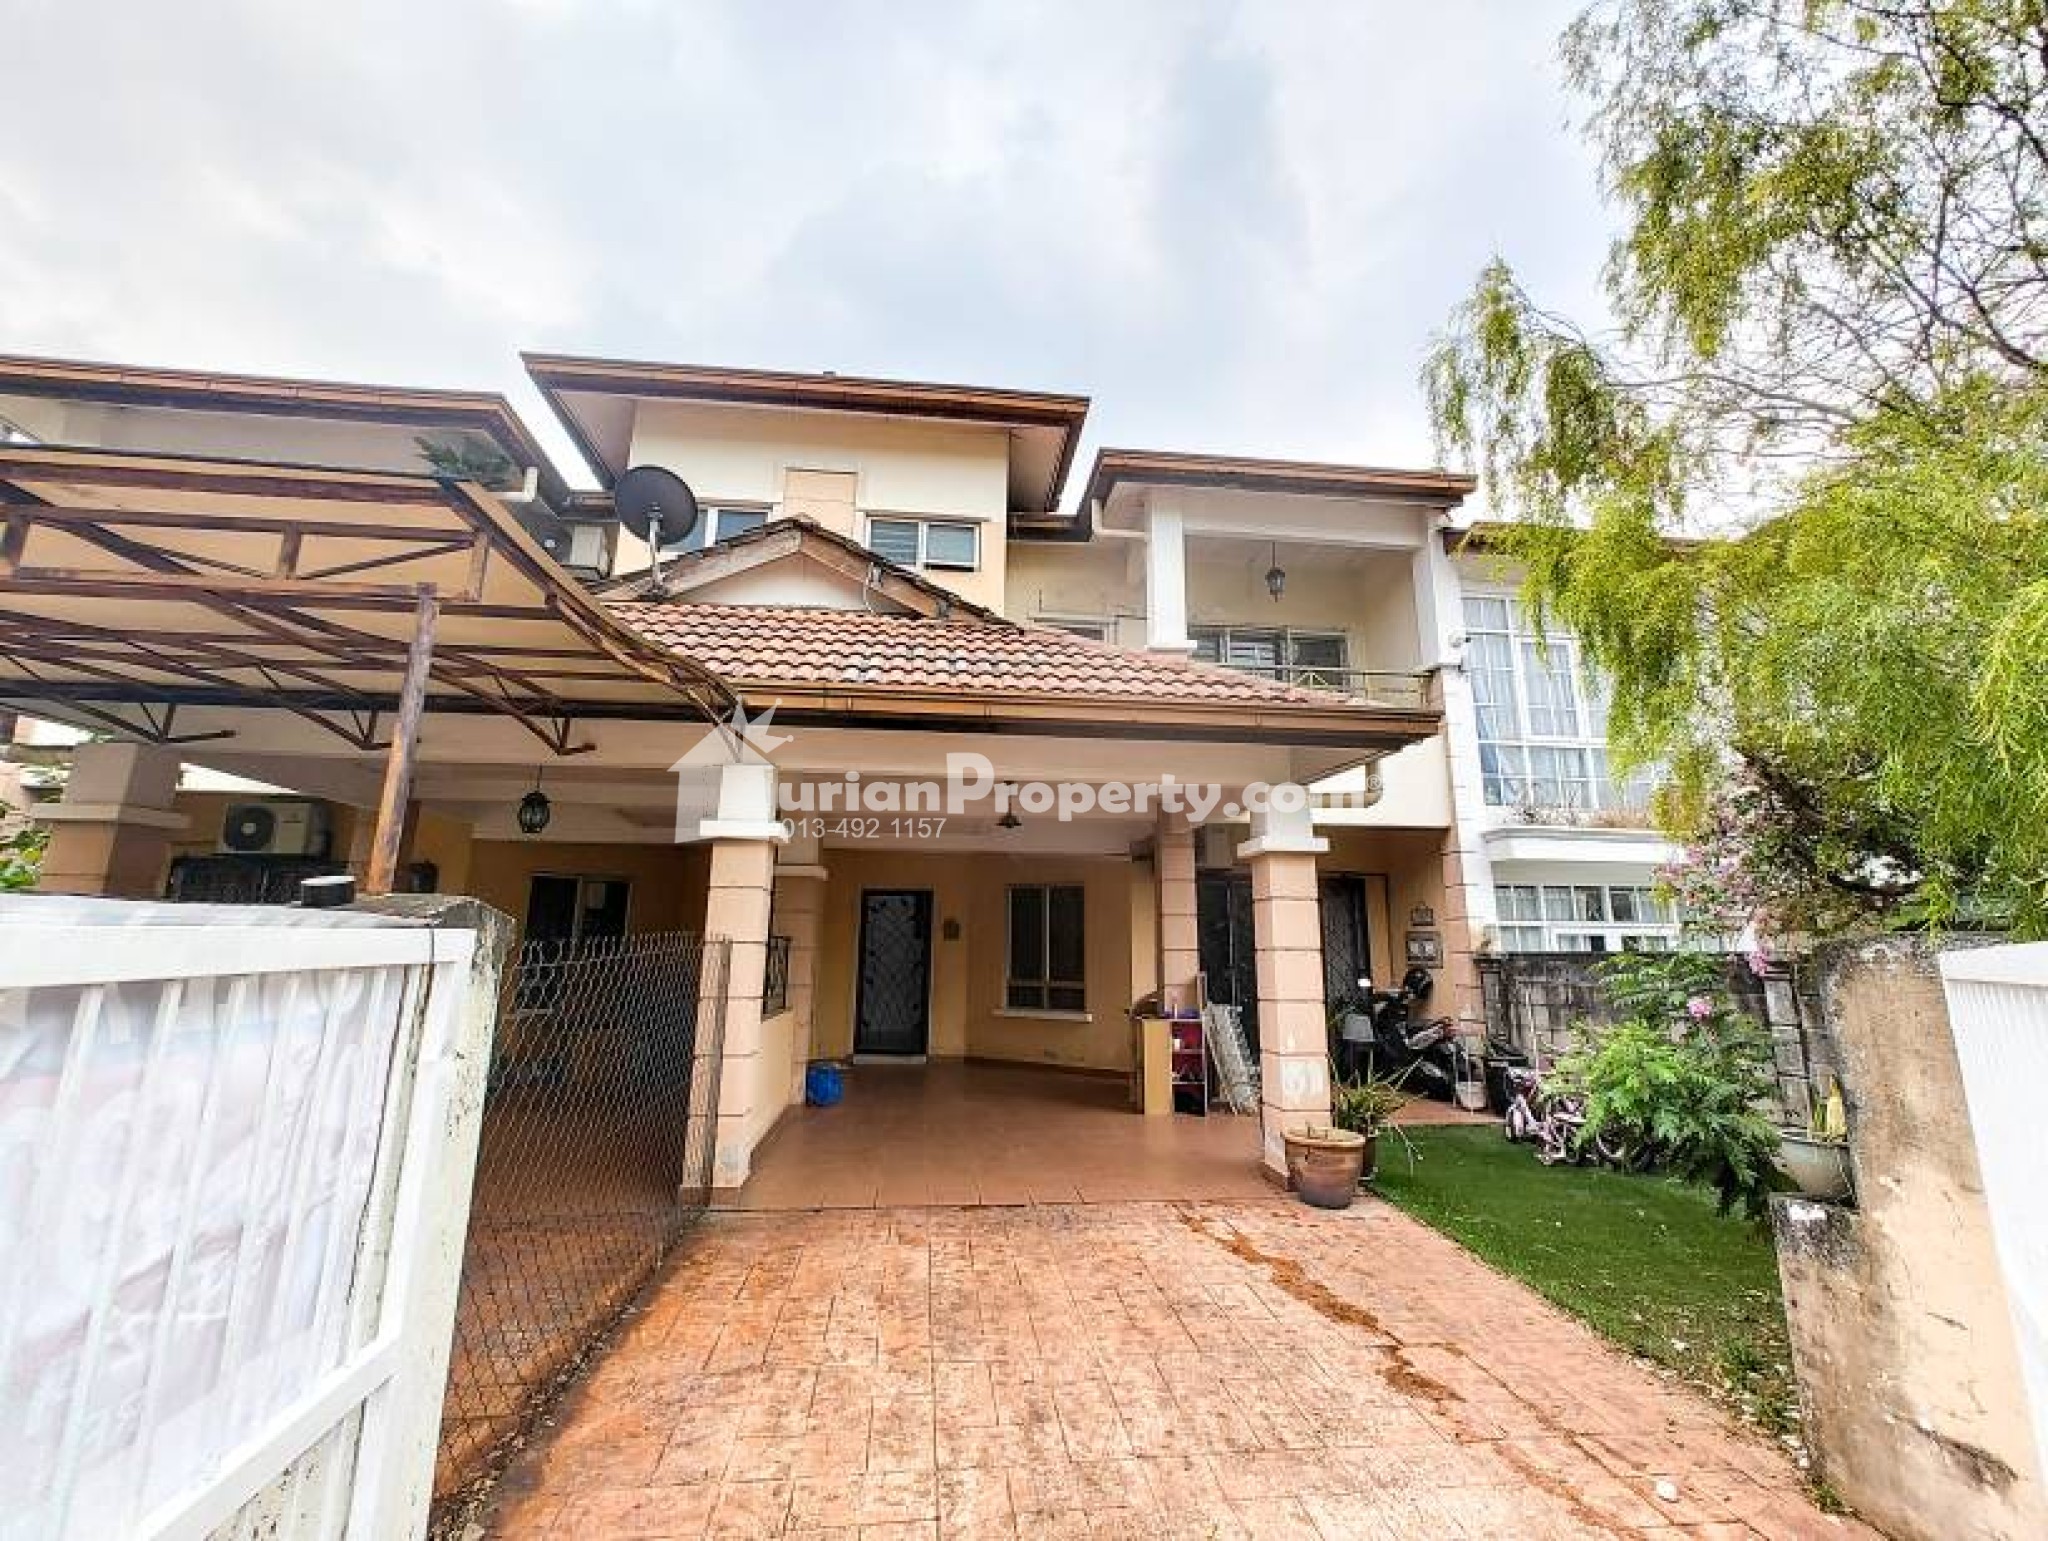 Terrace House For Sale at Desa Alam